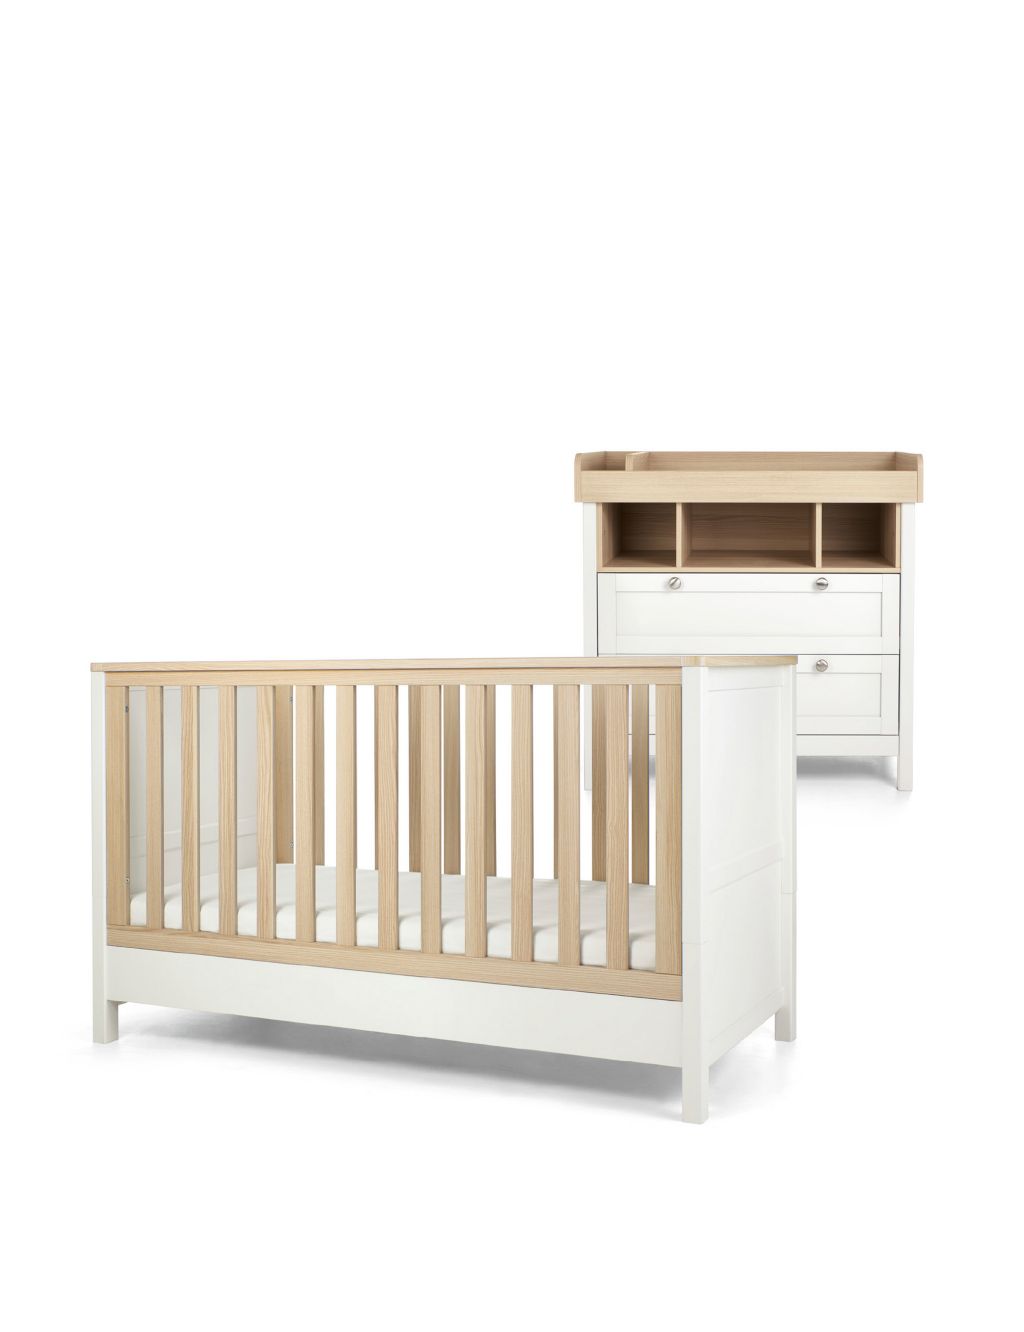 Harwell 2 Piece Cotbed Set with Dresser image 1